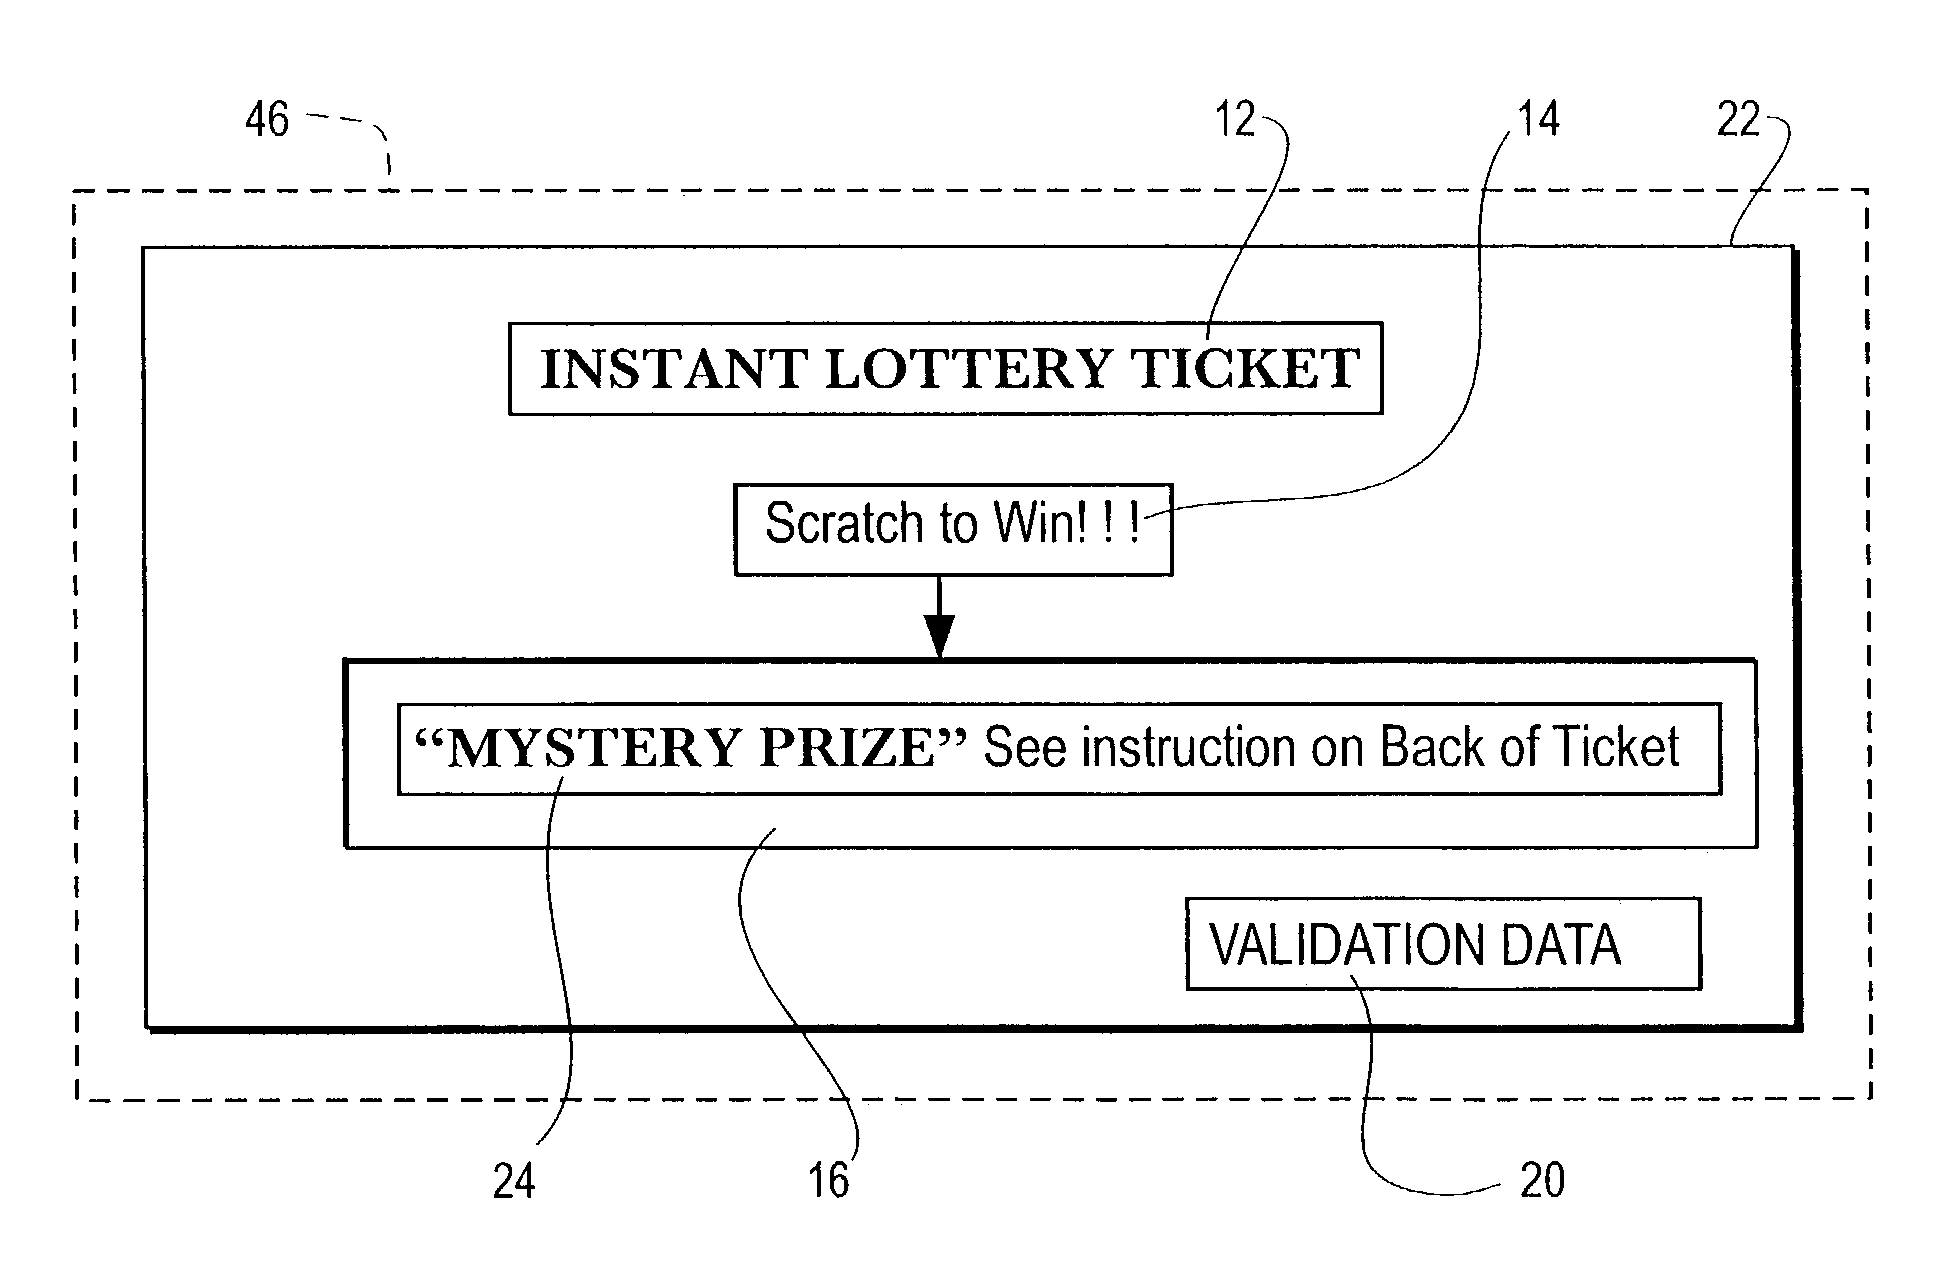 Lottery tickets with variable and static prizes where the variable redemption values change under certain predetermined events